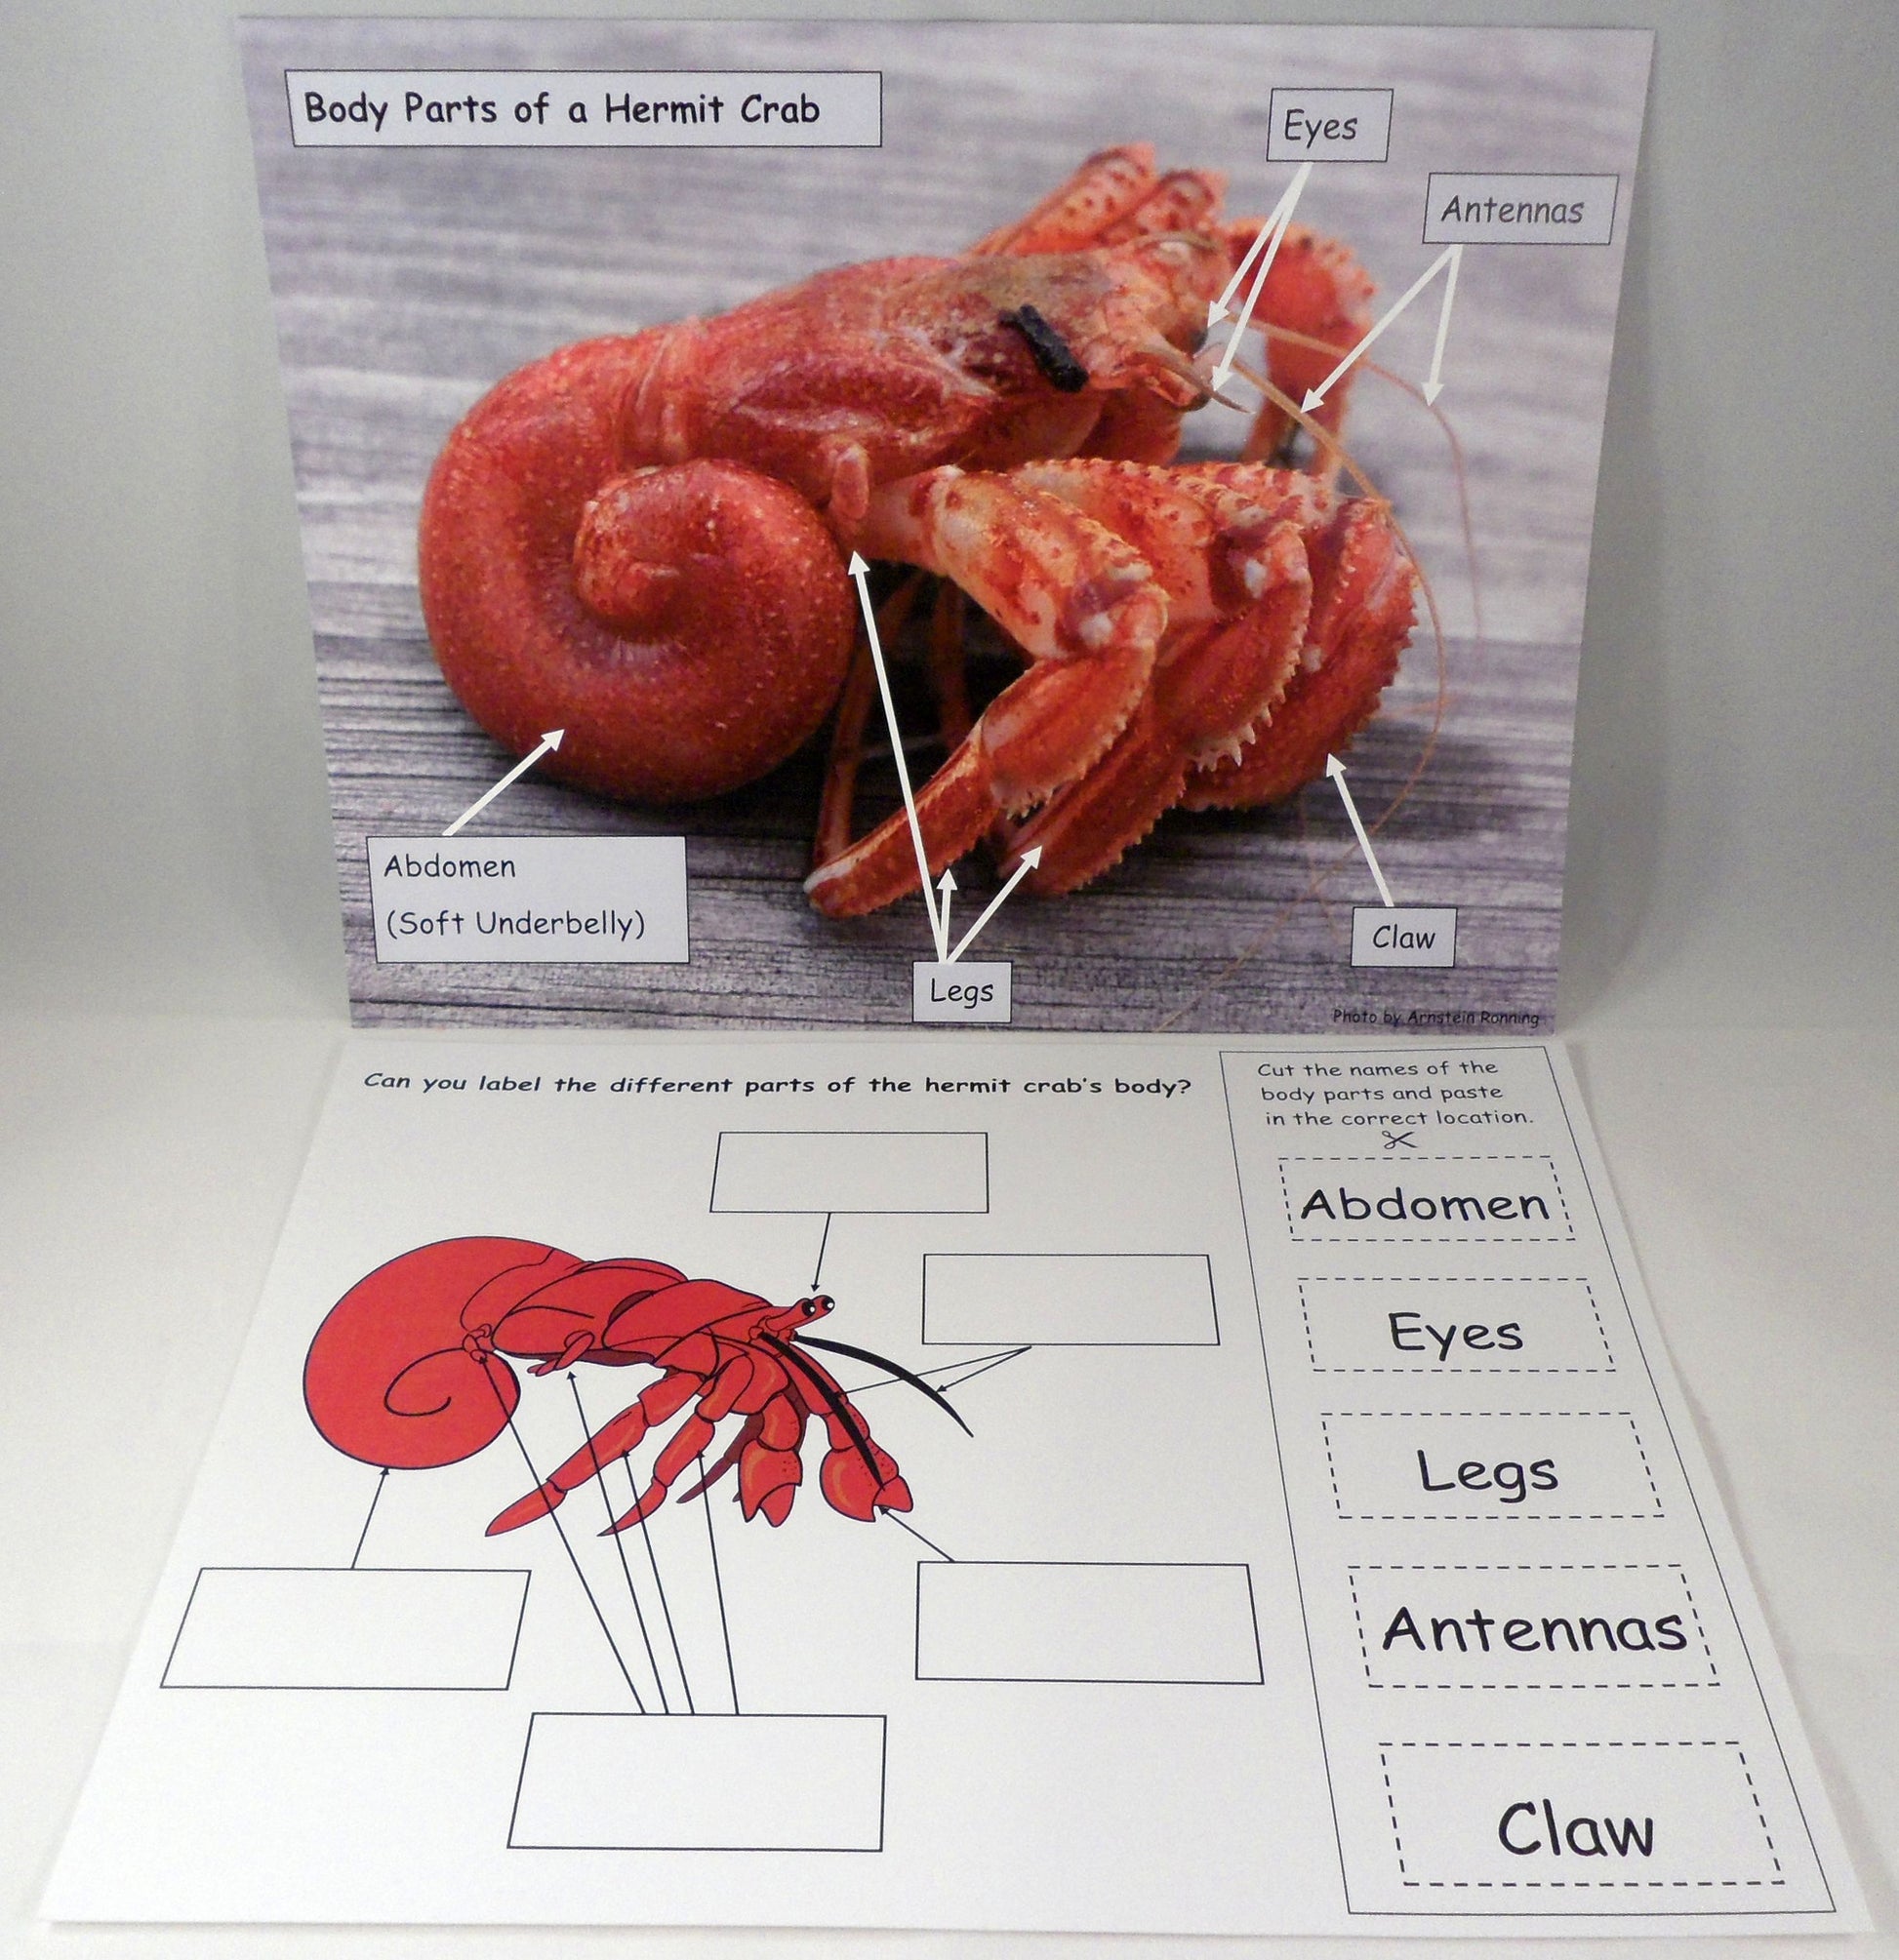 Hermit crab parts - A House for Hermit Crab - Ivy Kids subscription box activities.